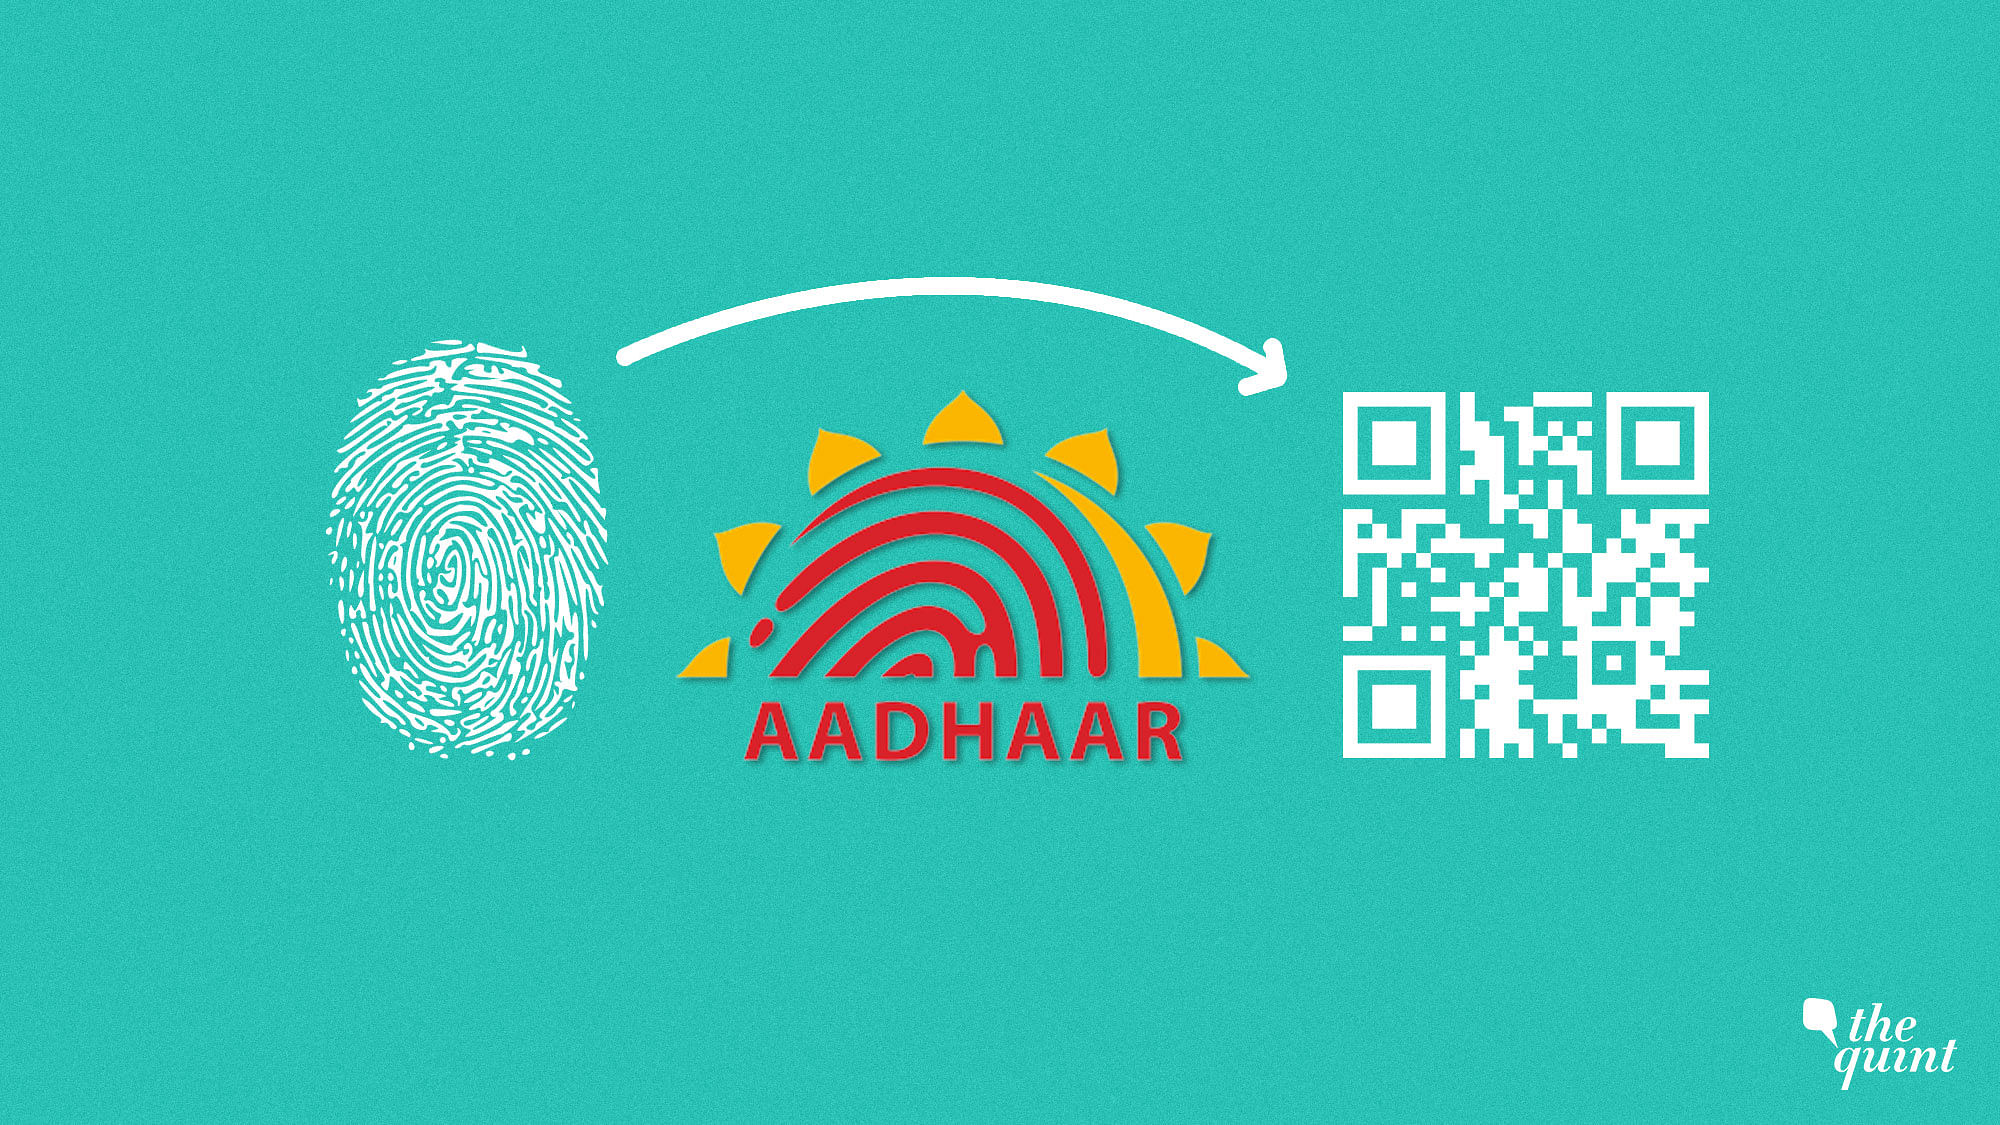 UIDAI is pushing for QR Code based verification to move away from biometric authentication